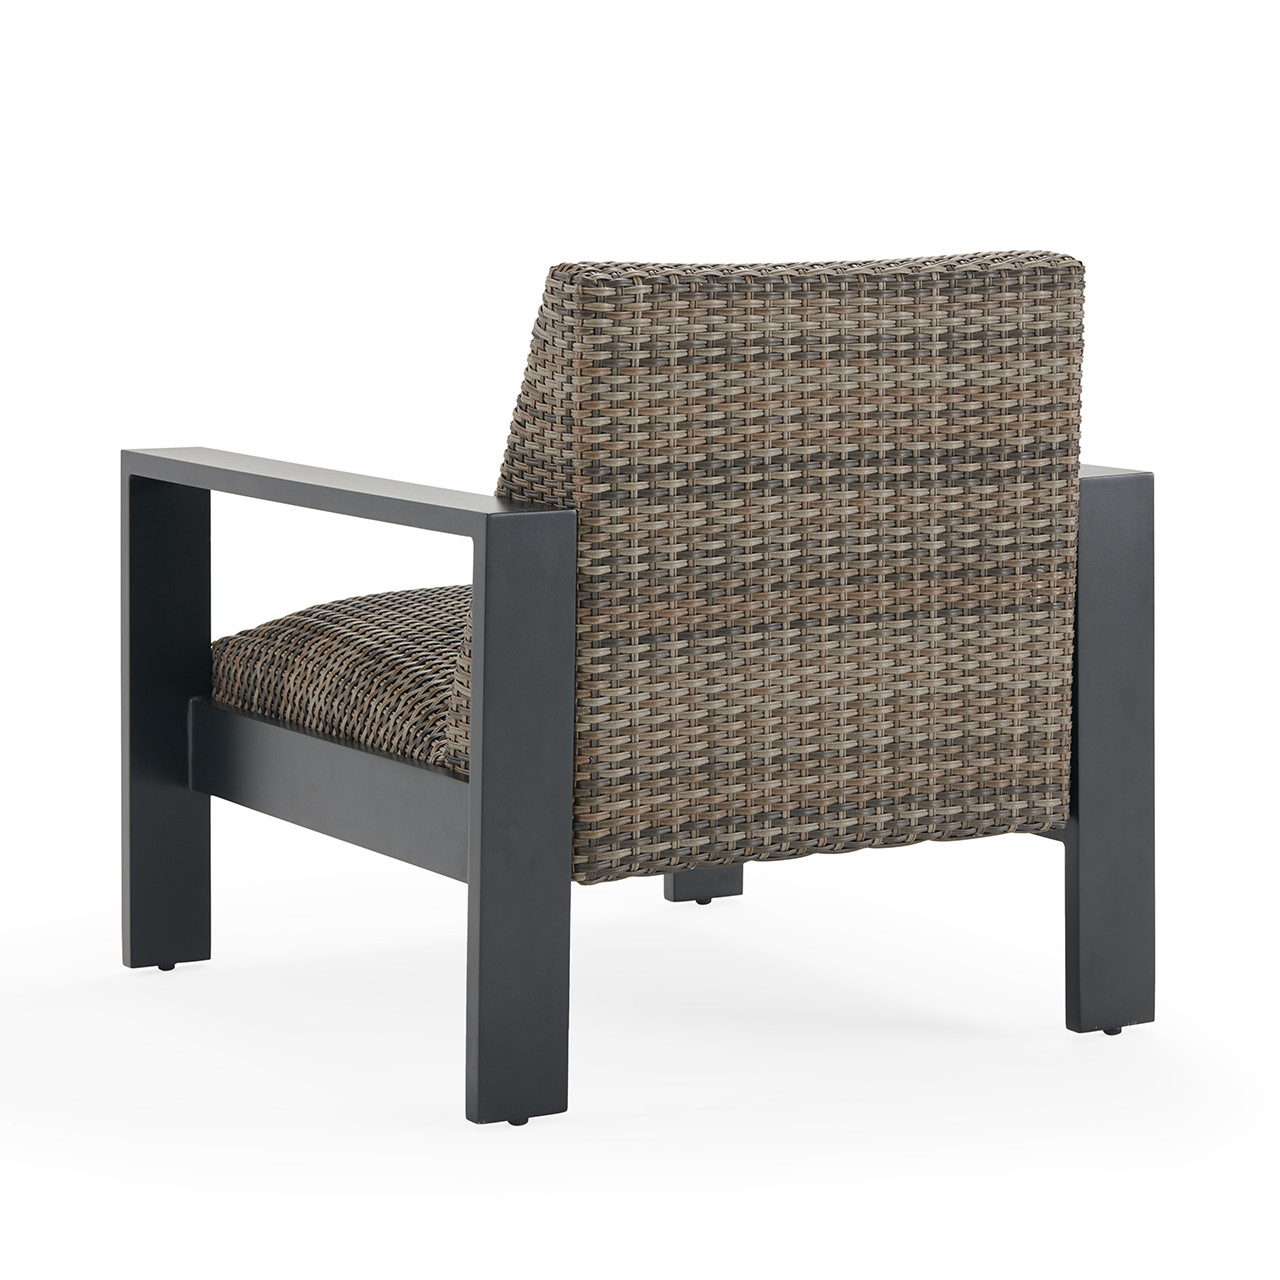 Chelsea Textured Black Outdoor Wicker with Concealed Cushion Club Chair